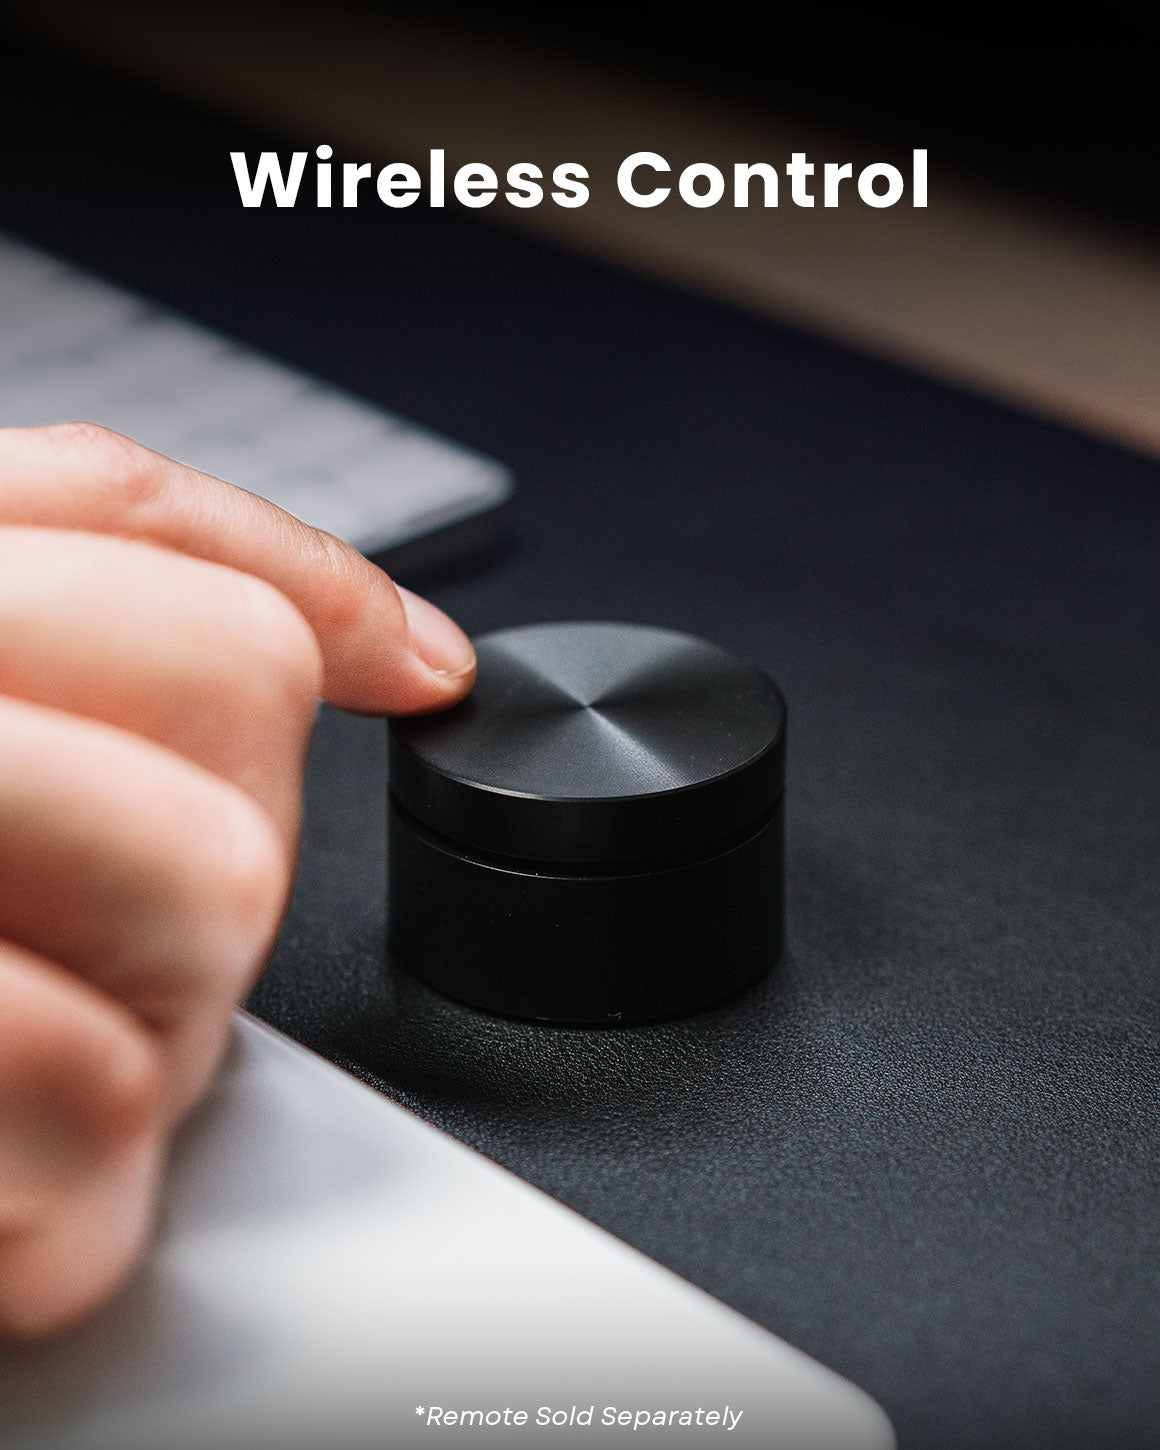 Wireless Control sold separately.  Lume Cube press-and-dial black metal wireless desktop control.